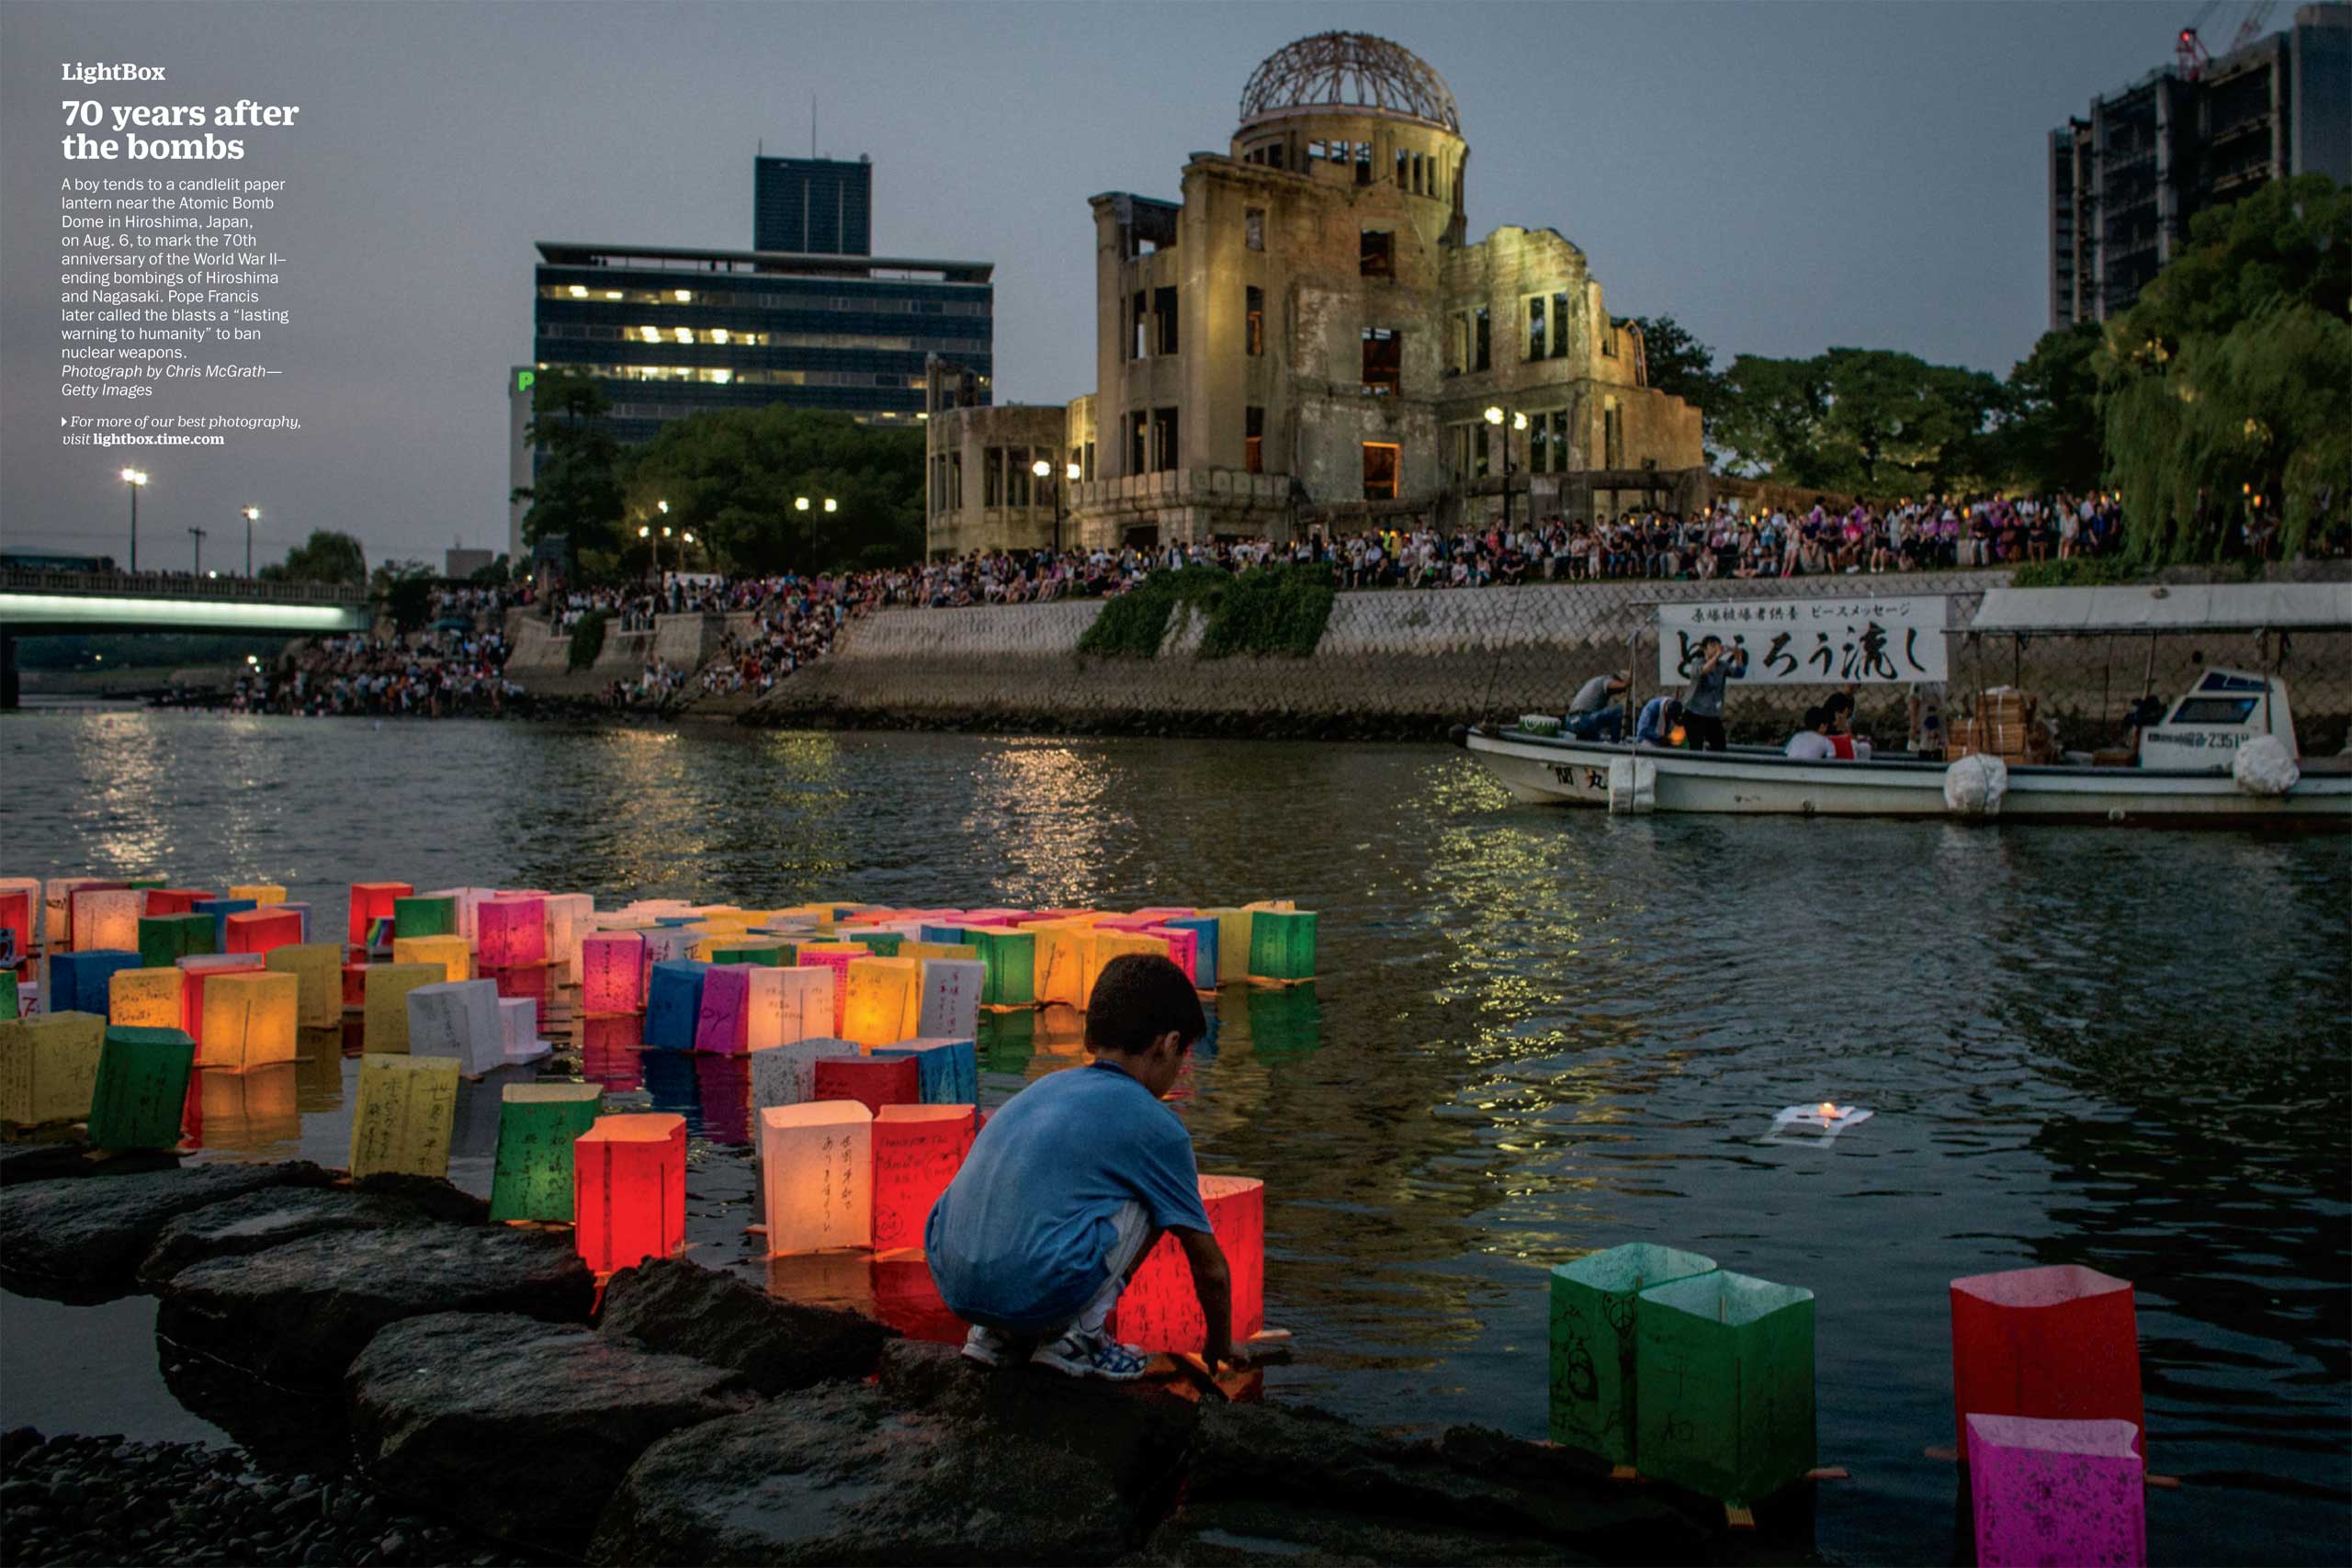 Photograph by Chris McGrath—Getty ImagesA boy tends to a candlelit paper lantern near the Atomic Bomb Dome in Hiroshima, Japan, on Aug. 6, to mark the 70th anniversary of the World War II--ending bombings of Hiroshima and Nagasaki. Pope Francis later called the blasts a  lasting warning to humanity  to ban nuclear weapons. (TIME issue August 24, 2015)